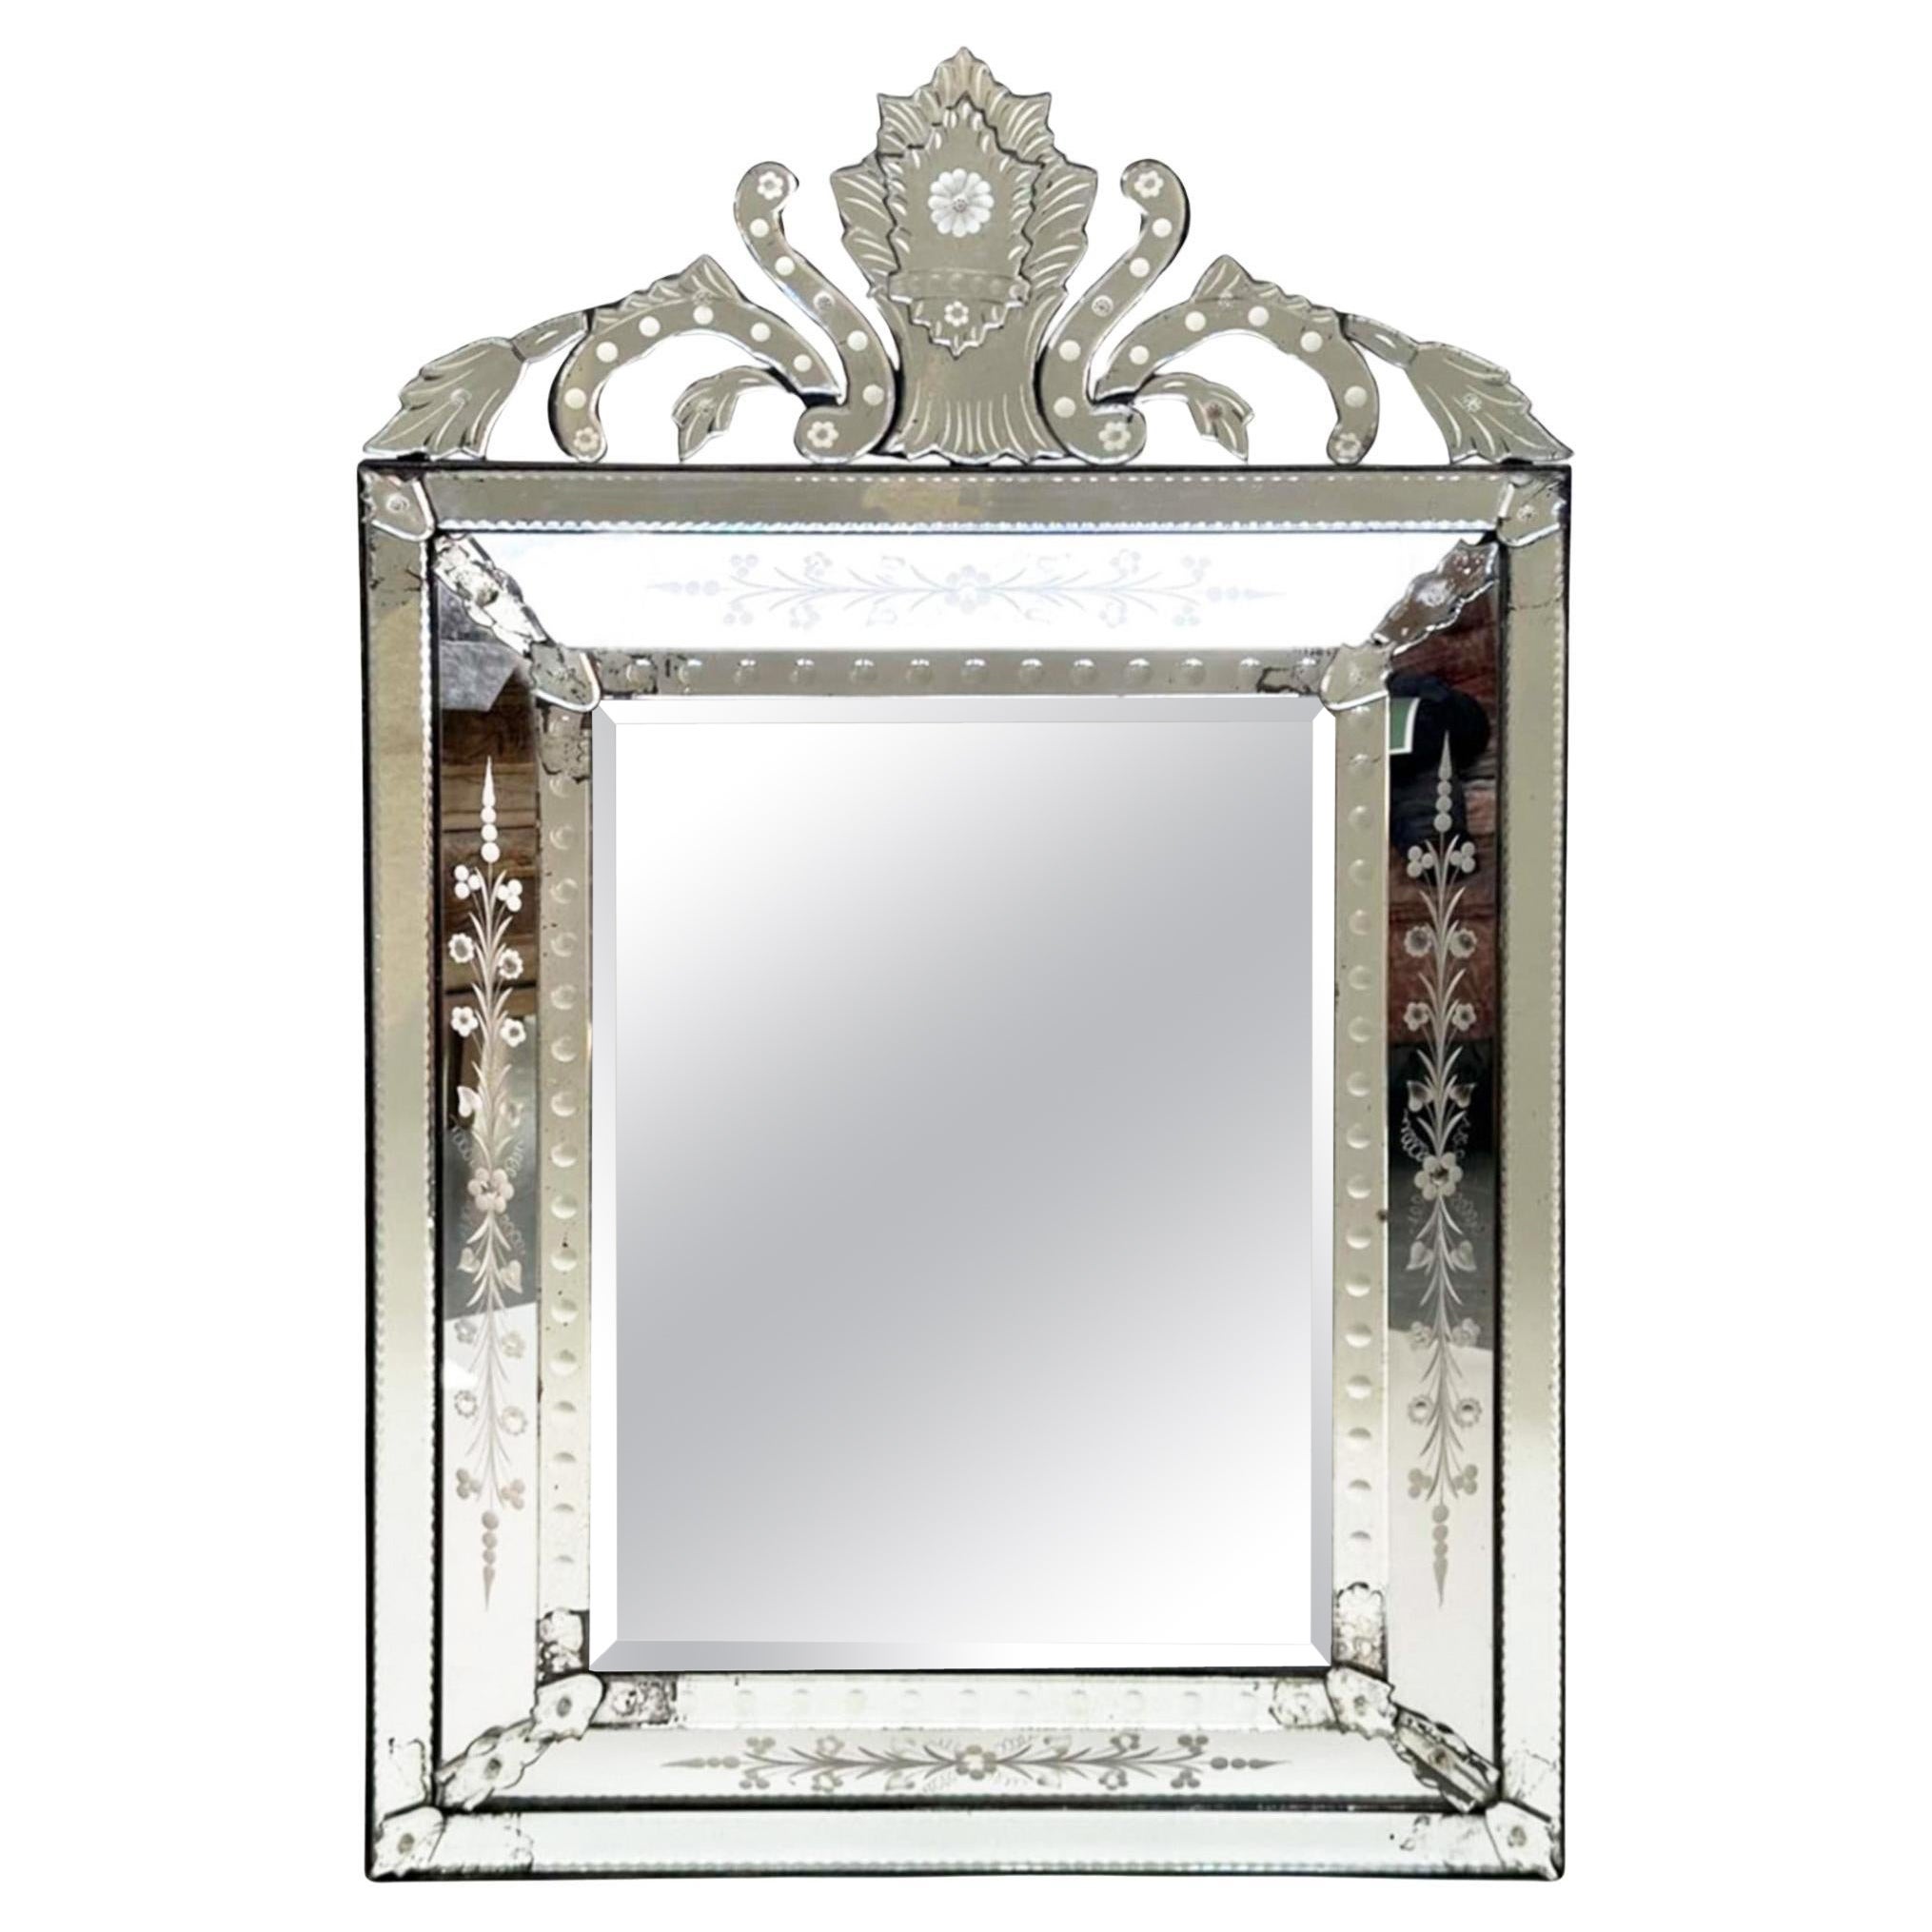 Venetian Mirror With A Shield Crest, Early 20th Century For Sale